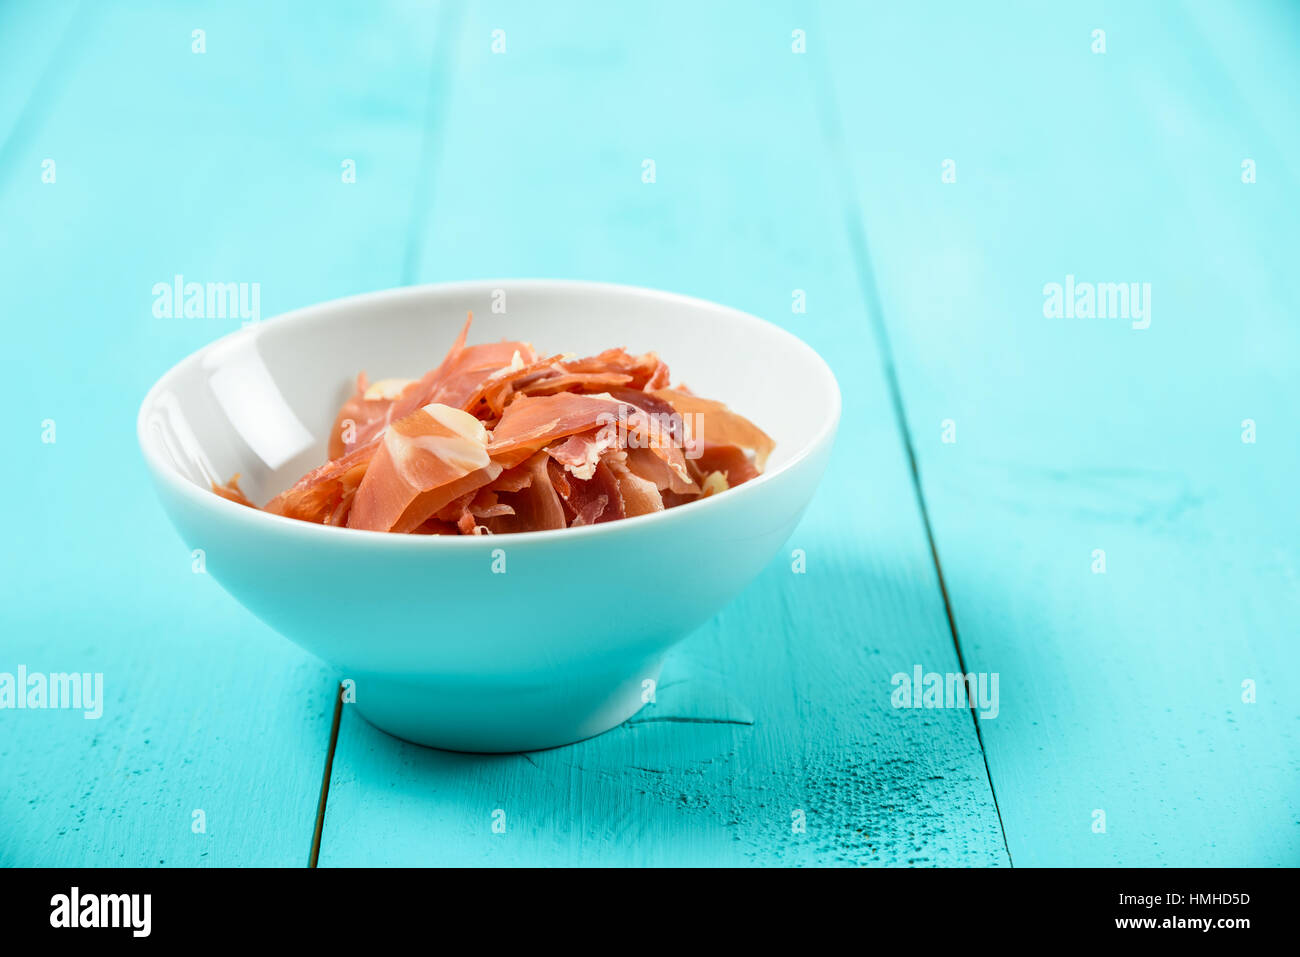 Fresh Bacon In White Bowl On Turquoise Table Stock Photo